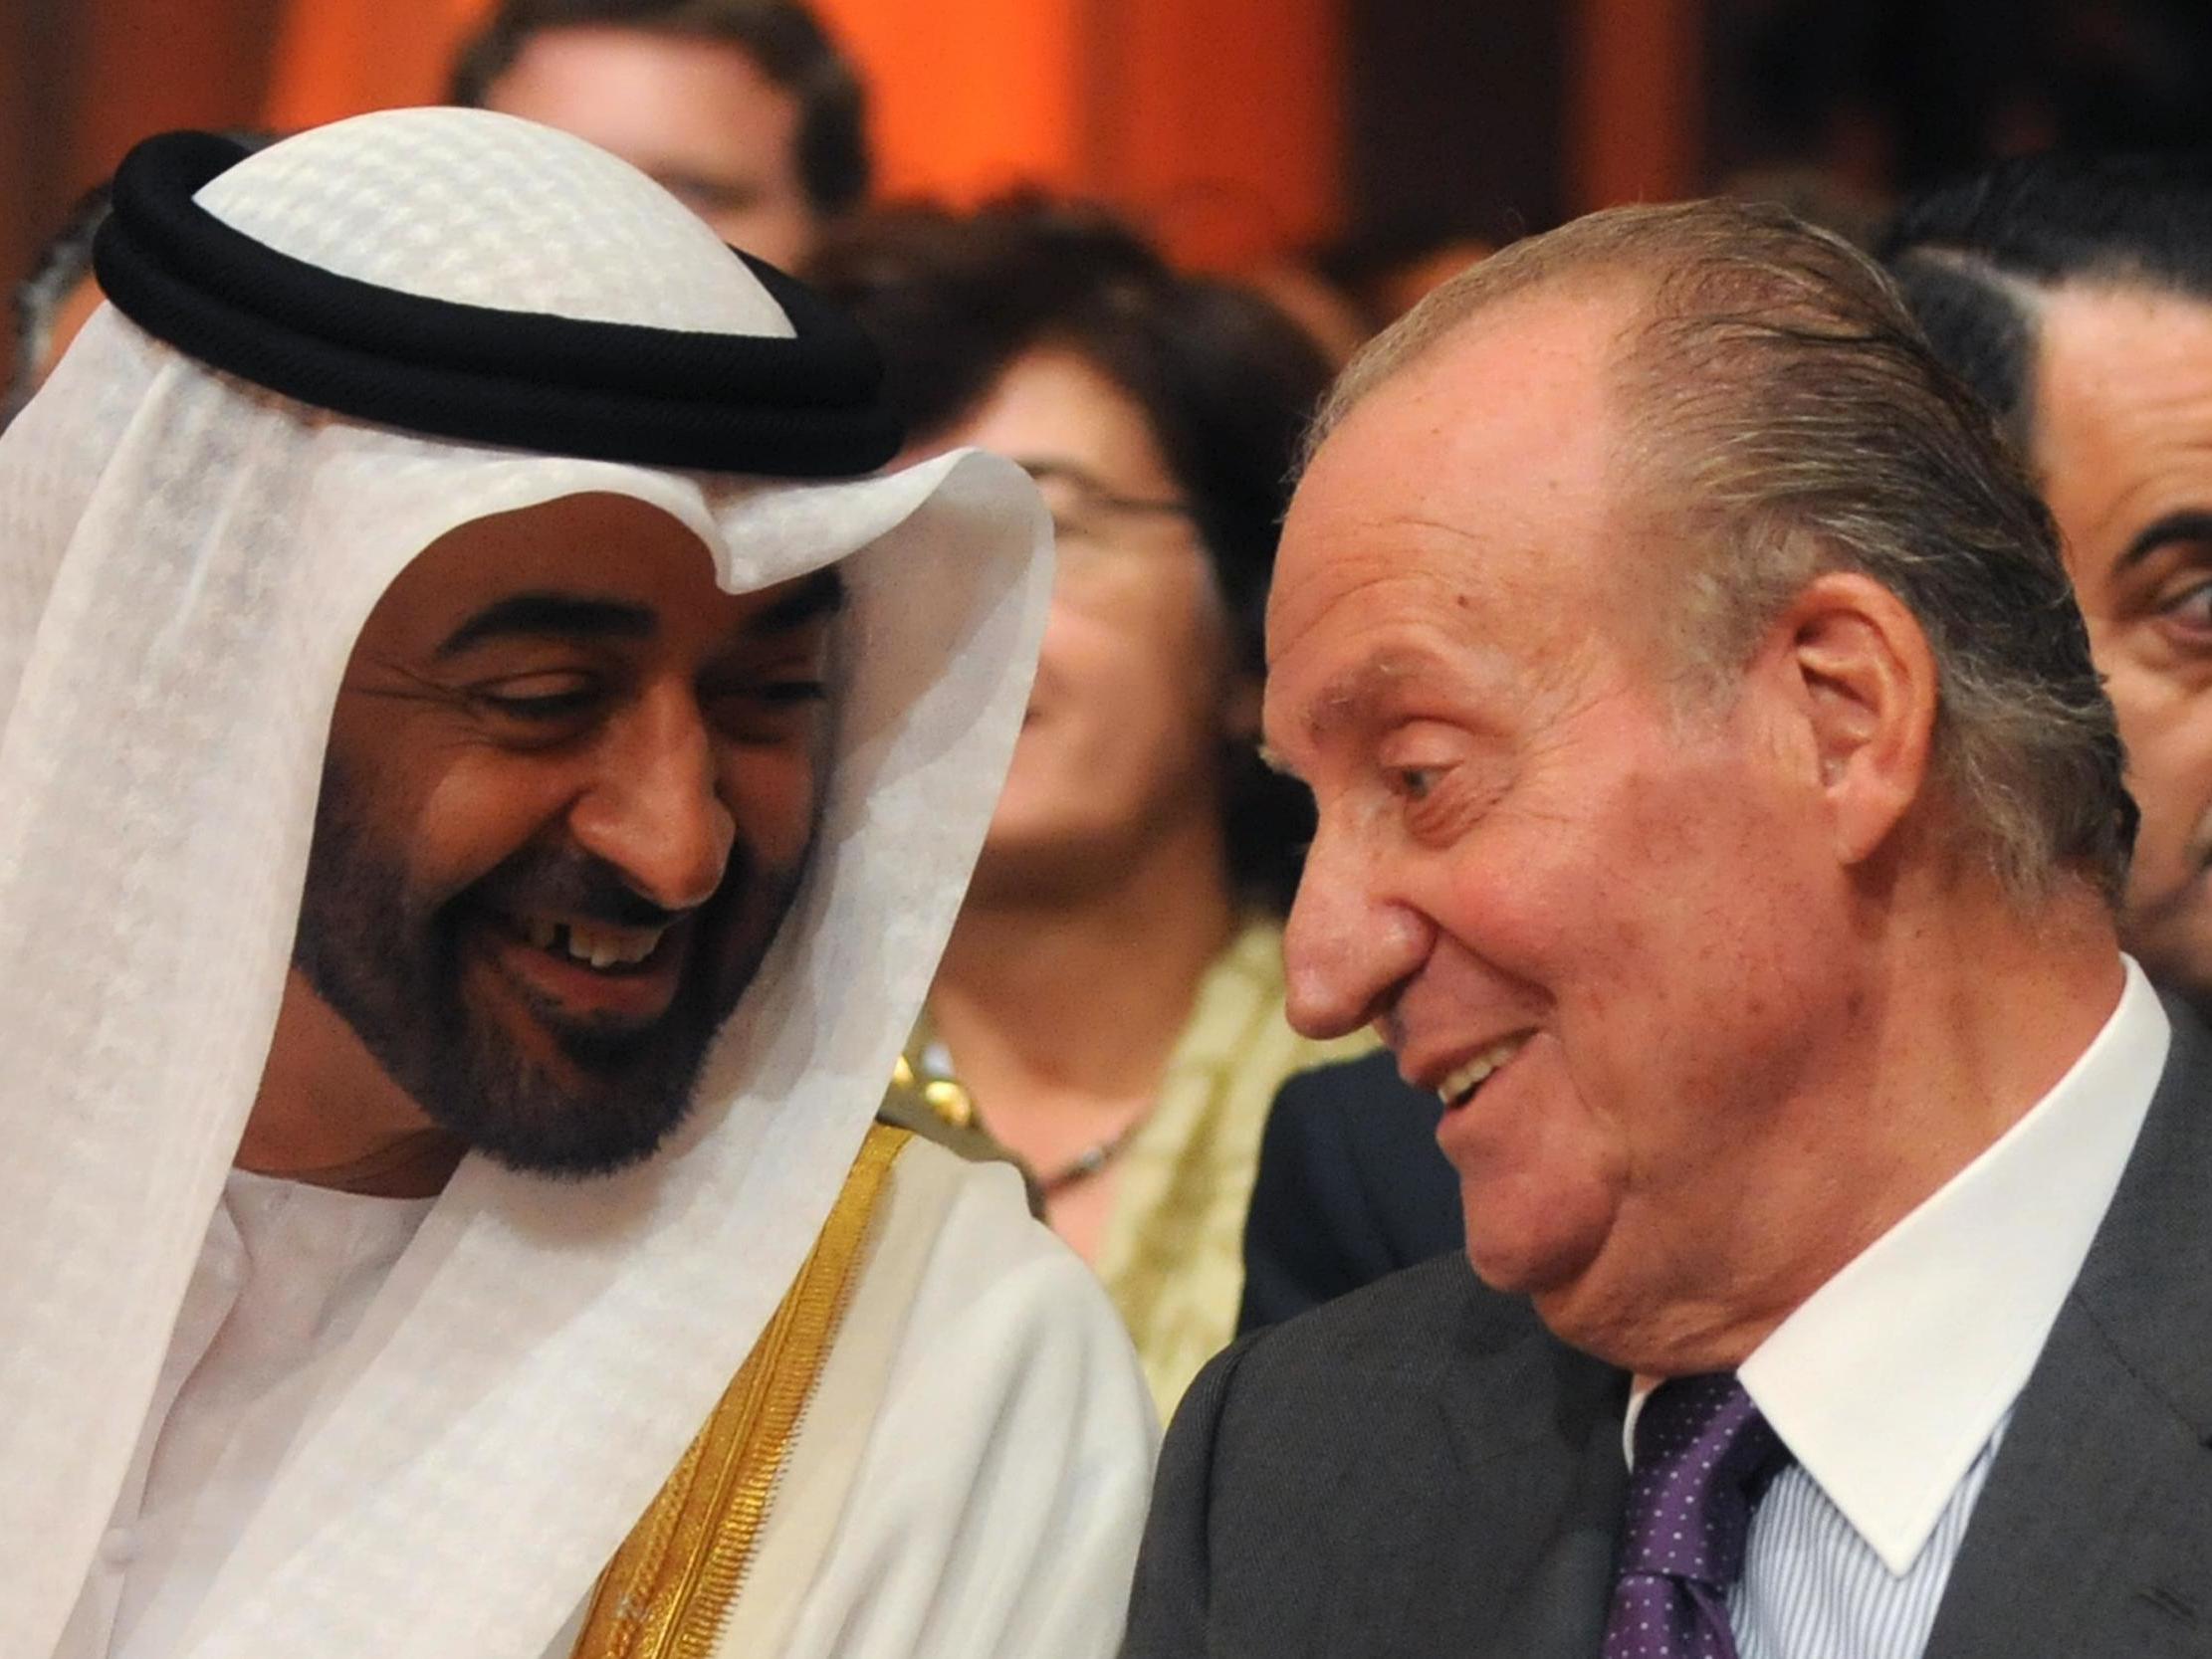 Juan Carlos (right) is seen with the crown prince of Abu Dhabi, Sheikh Mohammed bin Zayed Al Nahyan in 2011